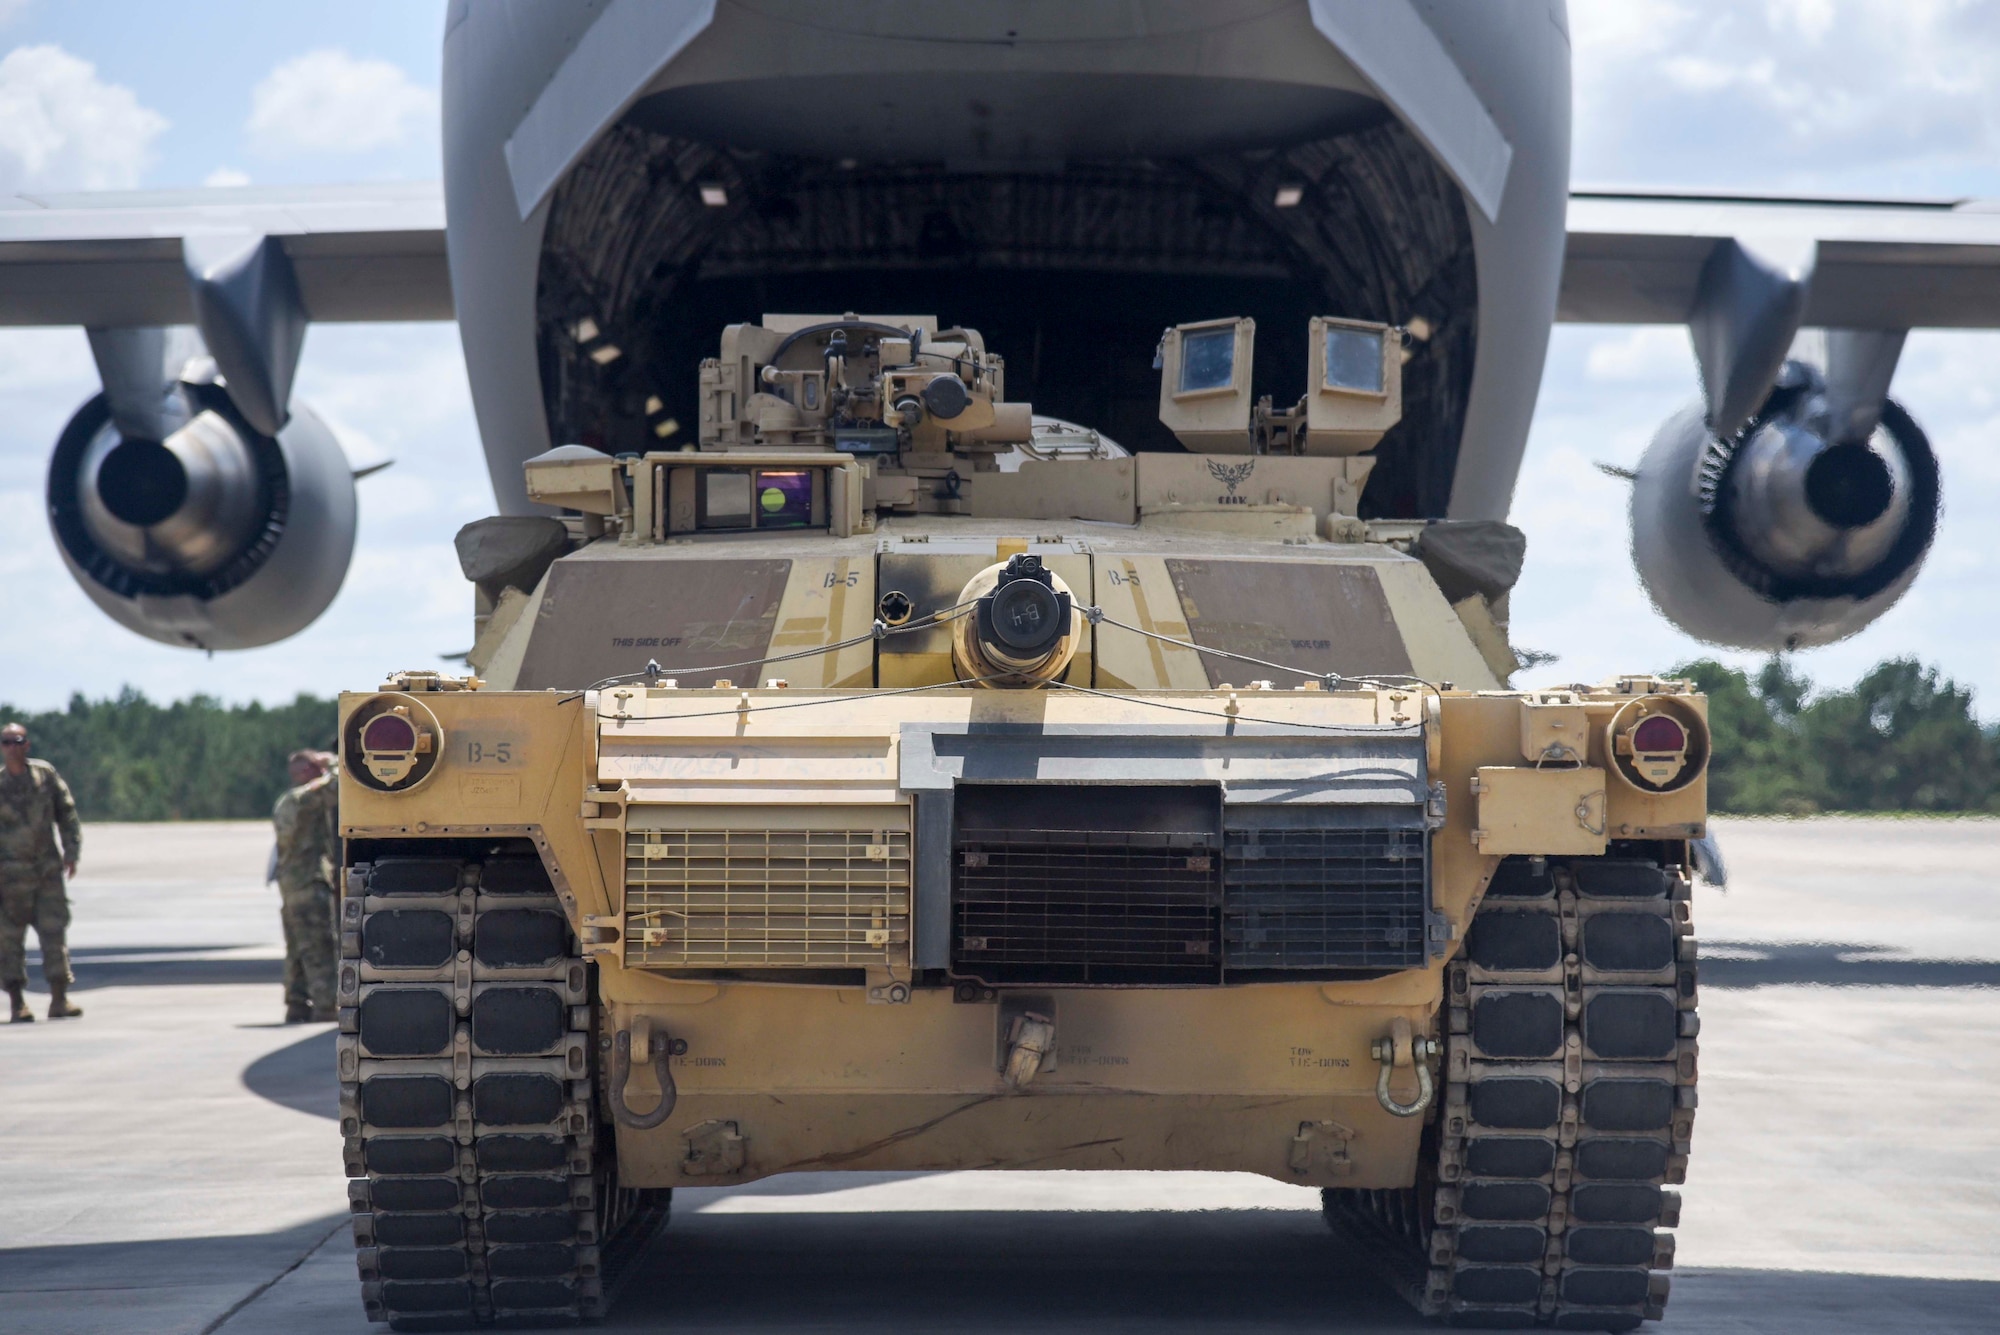 Members of the 164th Air Lift Wing in Memphis and the 278th Armored Cavalry Regiment in Knoxville prepare to load M1 Abrams for transport to 5th Canadian Division Support Base Gagetown, Canada. The 278th ACR was invited to compete in the 2016 Worthington Challenge. (US Air Force photo by Senior Airman Leon Bussey / Released)